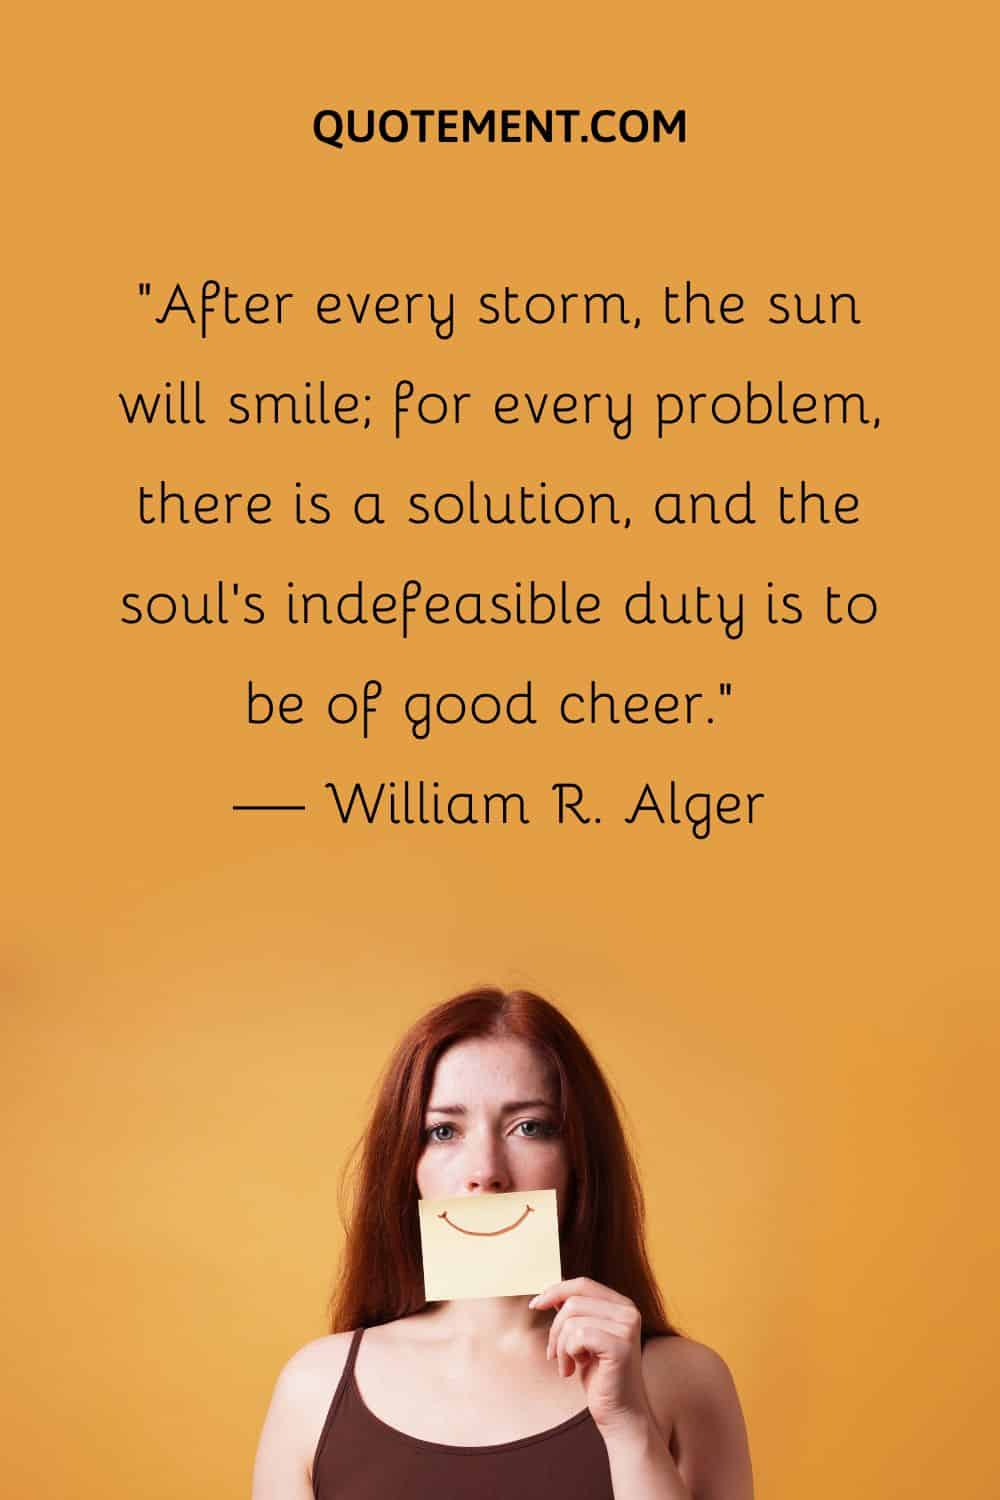 After every storm, the sun will smile; for every problem